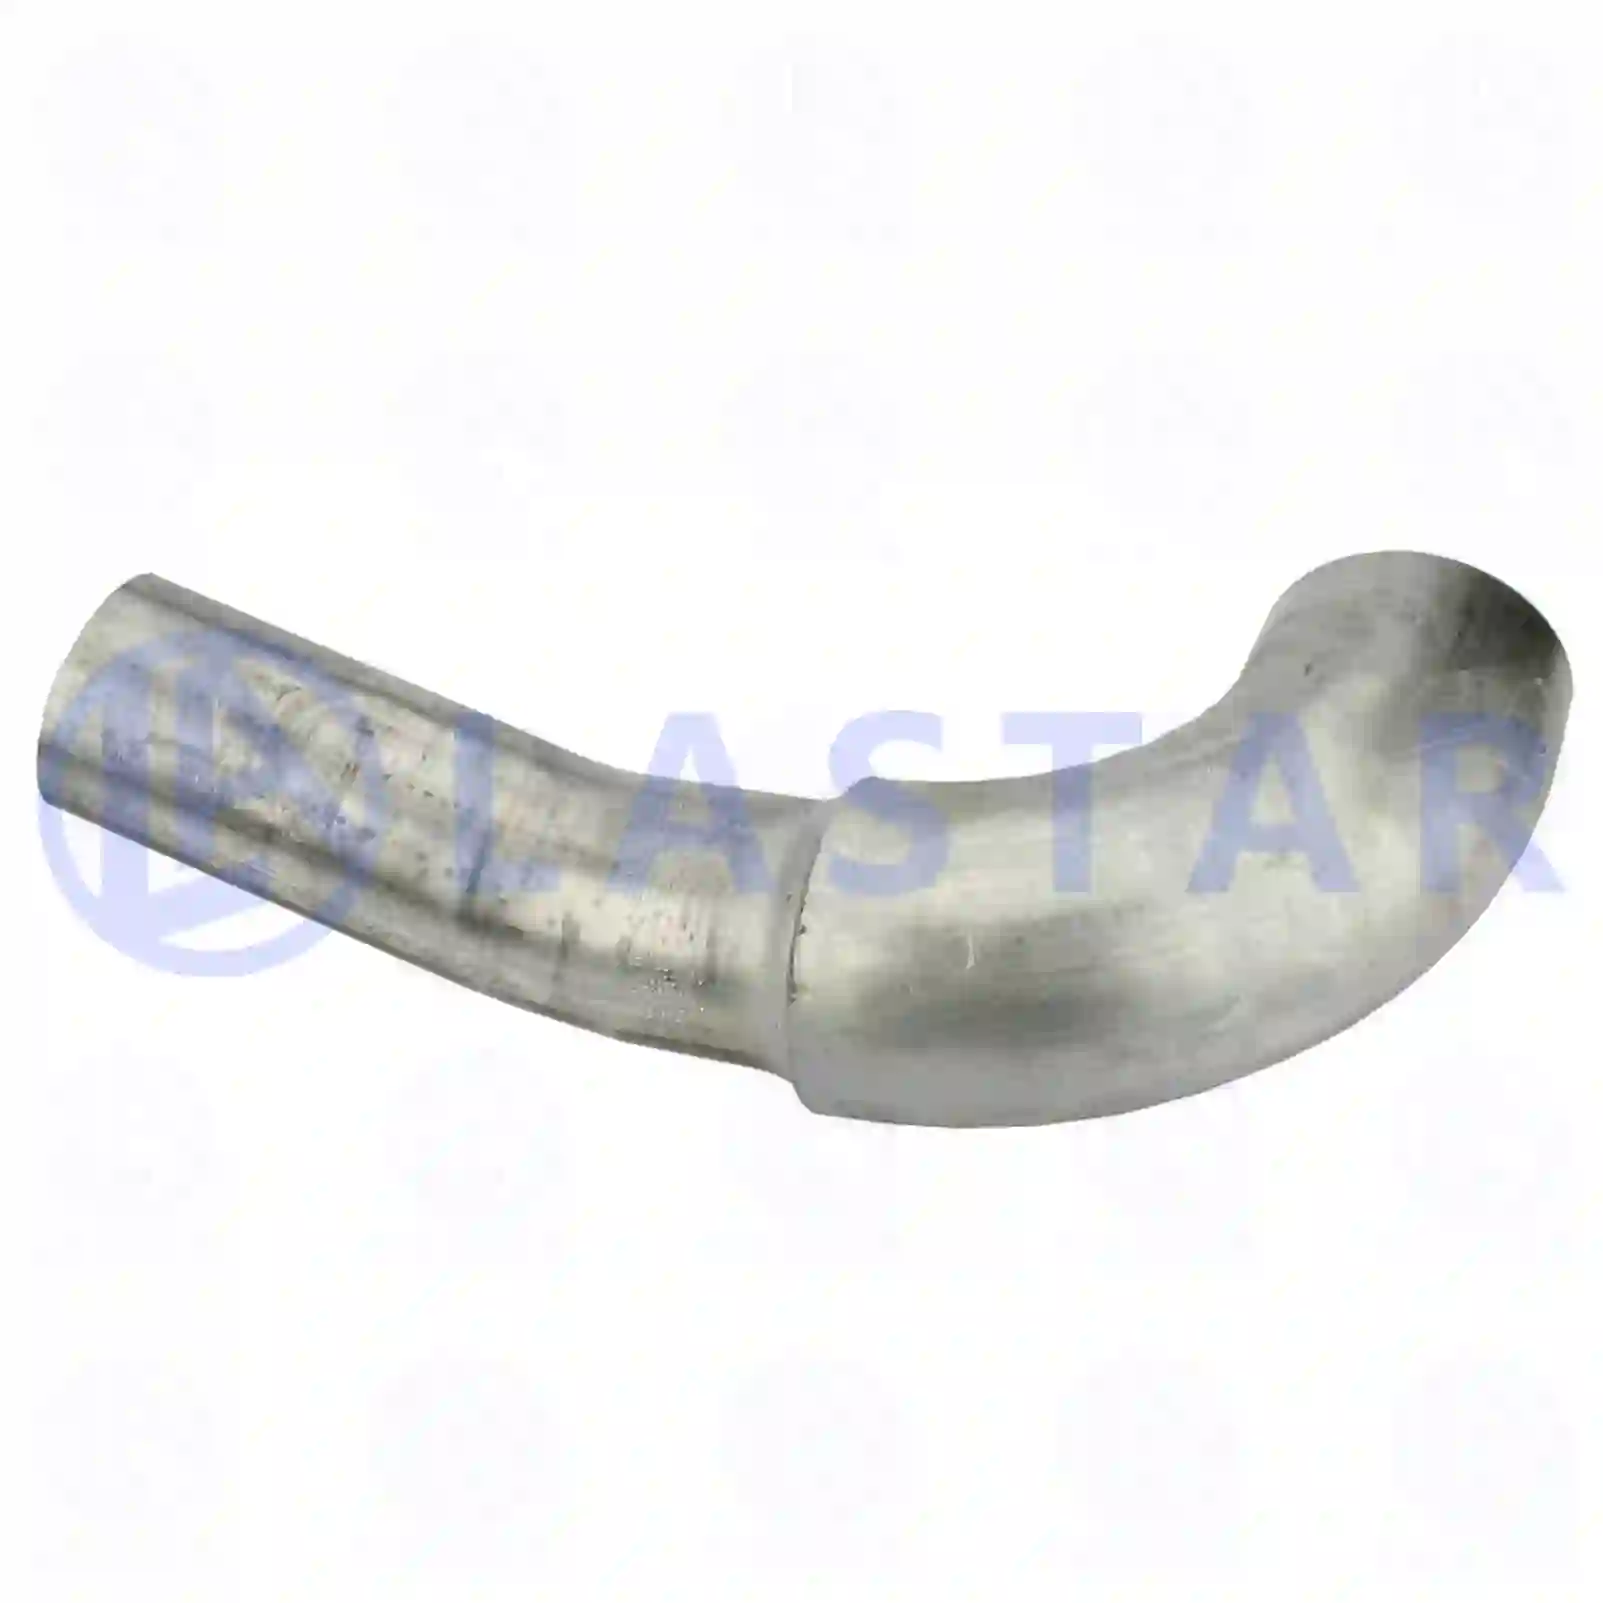 Front exhaust pipe, 77706876, 1076136, ZG10333-0008 ||  77706876 Lastar Spare Part | Truck Spare Parts, Auotomotive Spare Parts Front exhaust pipe, 77706876, 1076136, ZG10333-0008 ||  77706876 Lastar Spare Part | Truck Spare Parts, Auotomotive Spare Parts